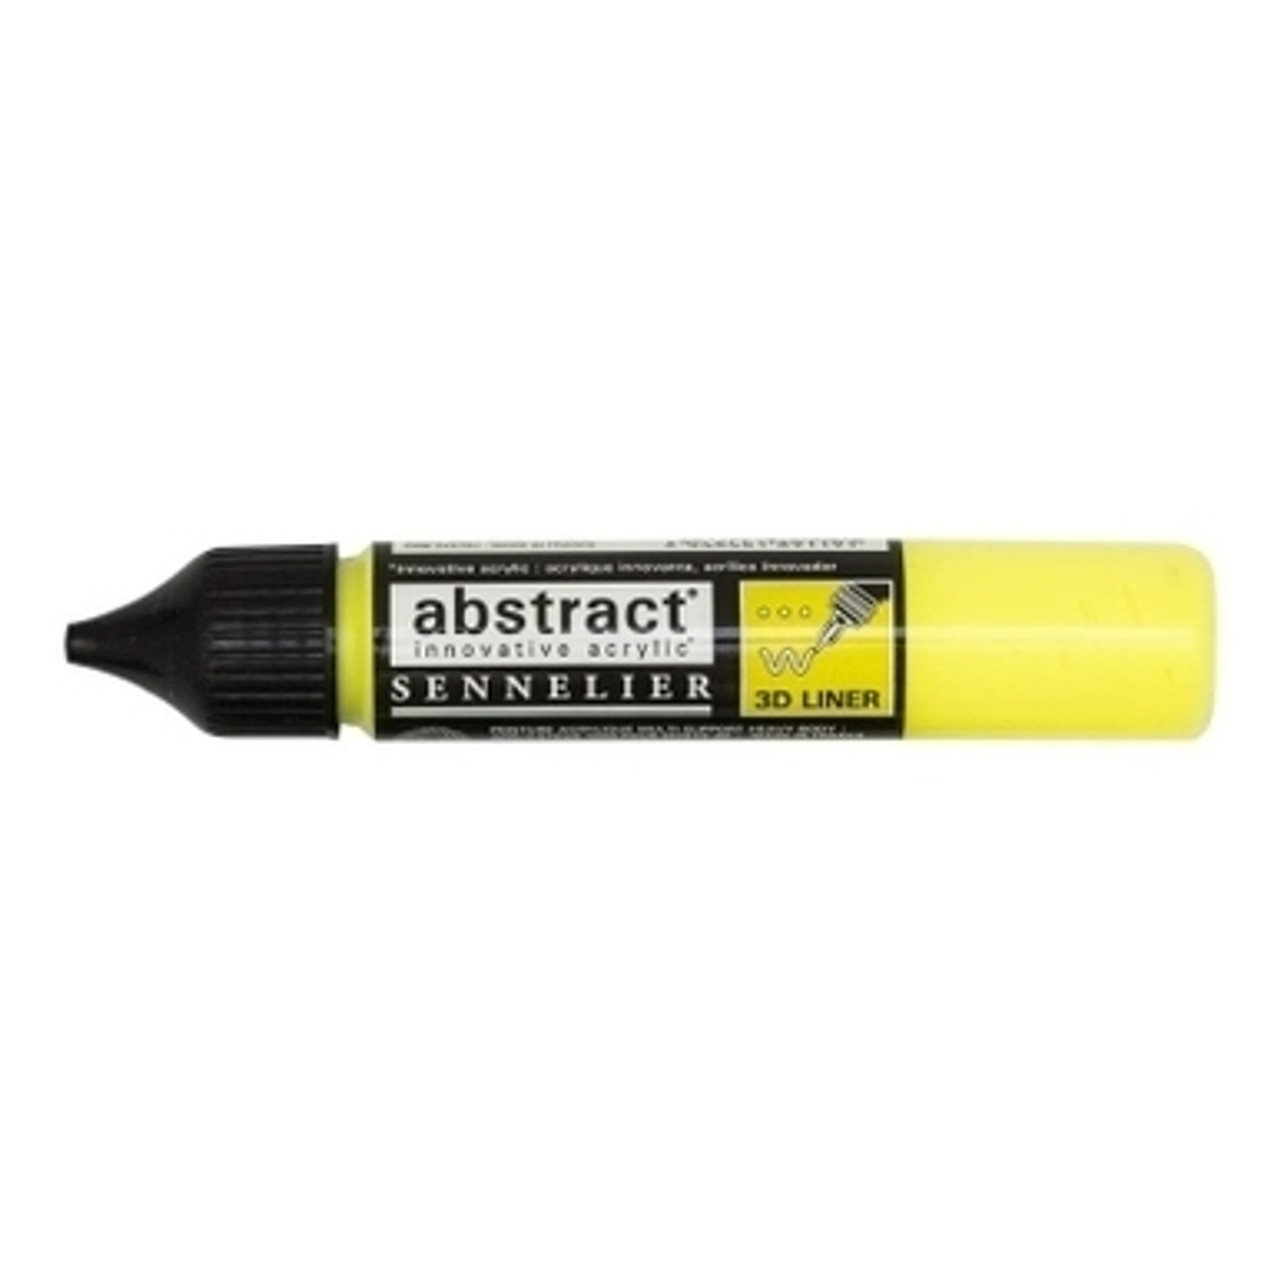 Sennelier Abstract Liner Fluorescent Yellow